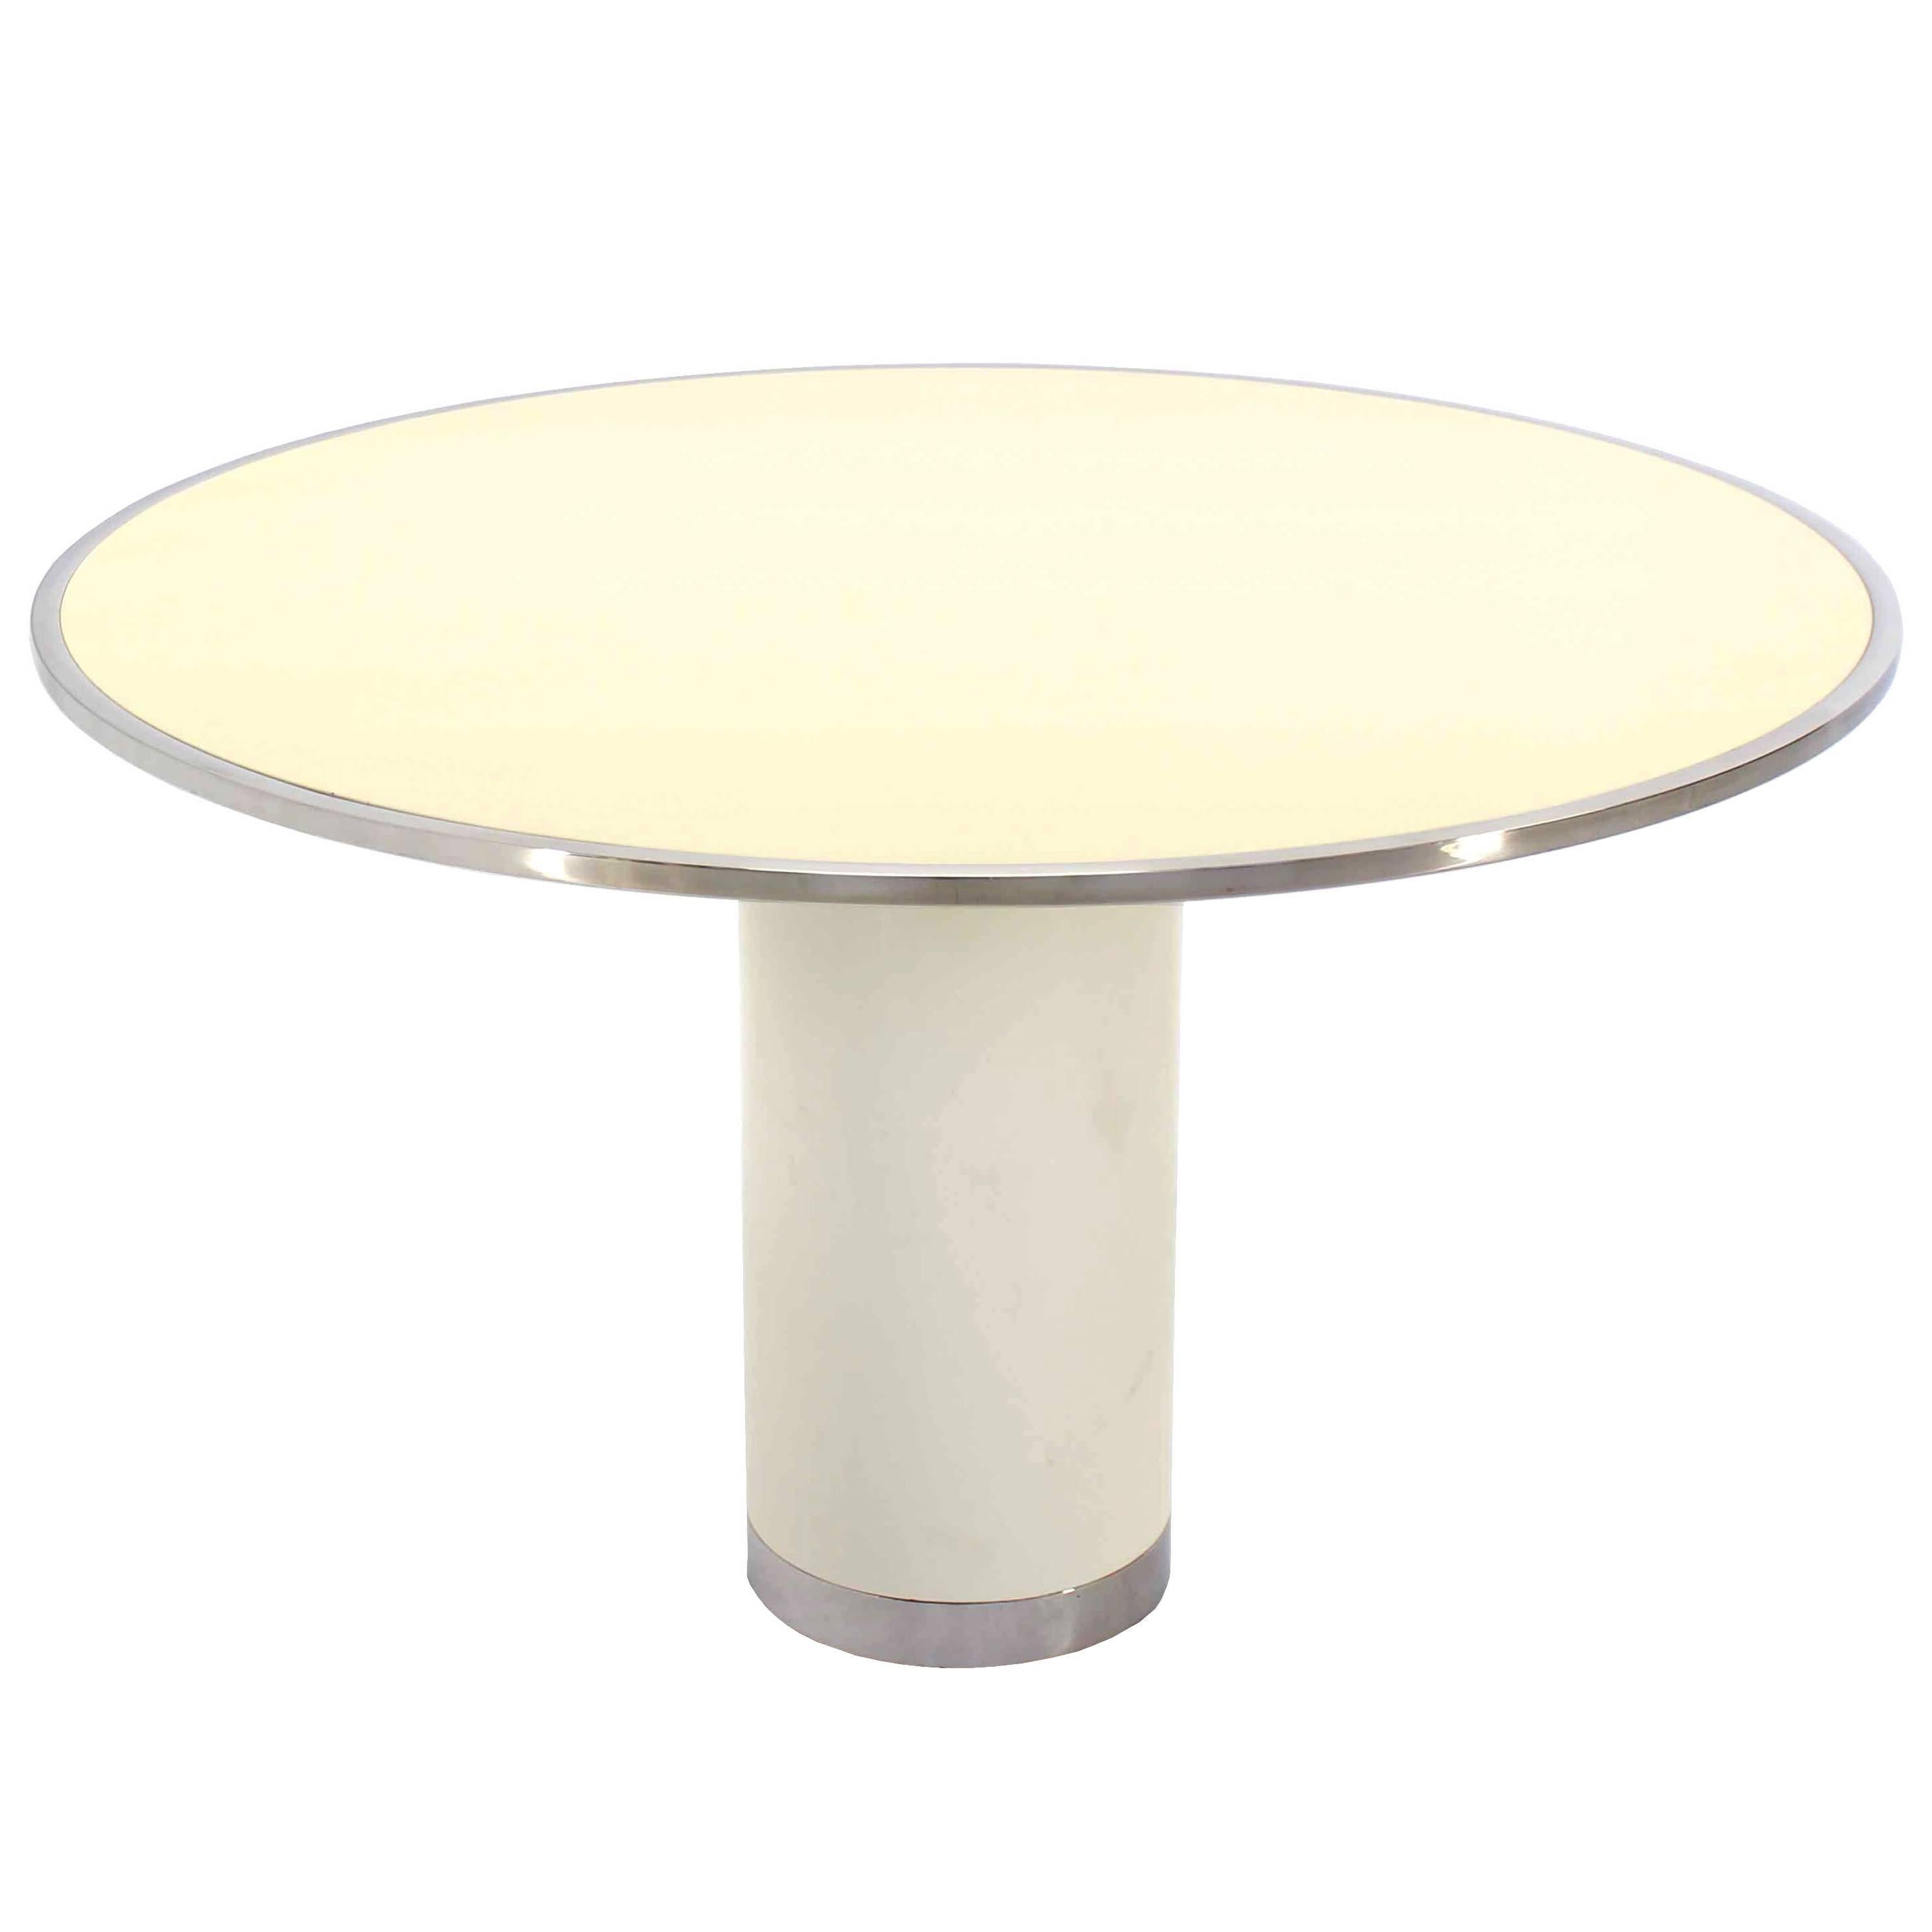 Heavy Enameled Metal Cylinder Pedestal Base  Top Round Gueridon Dining Table For Sale